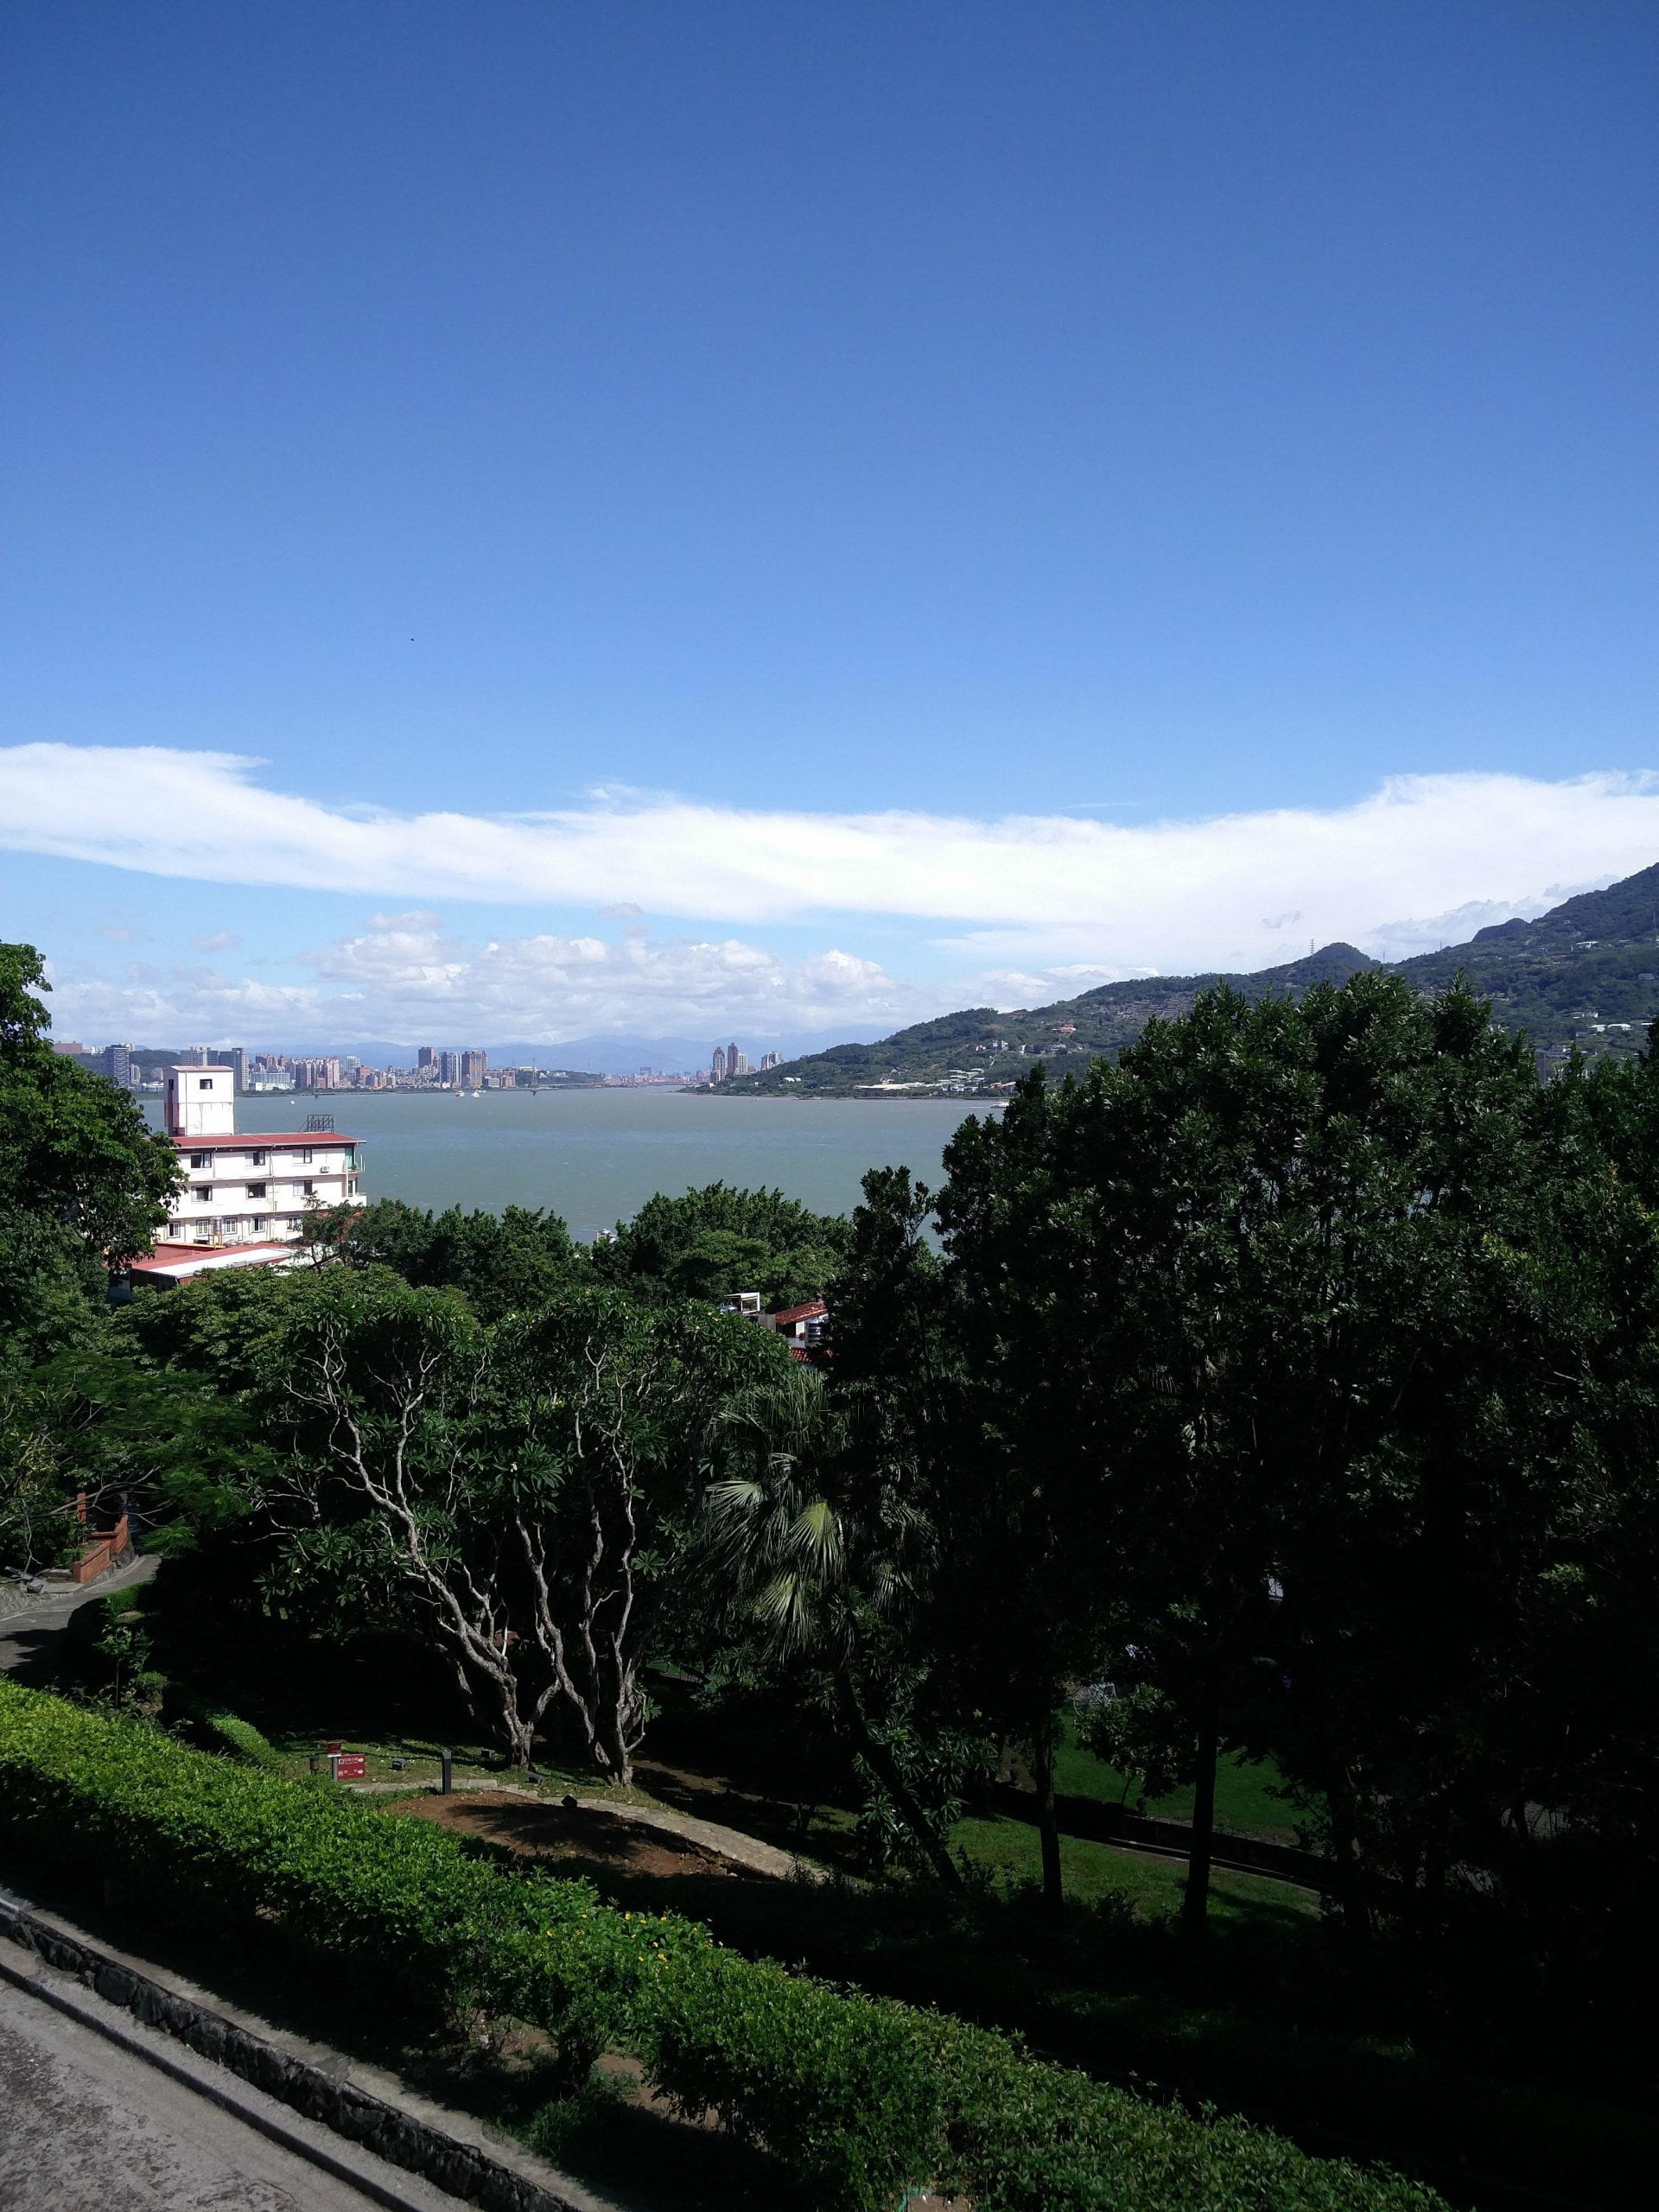 The view of the Tamsui River from Fort San Domingo